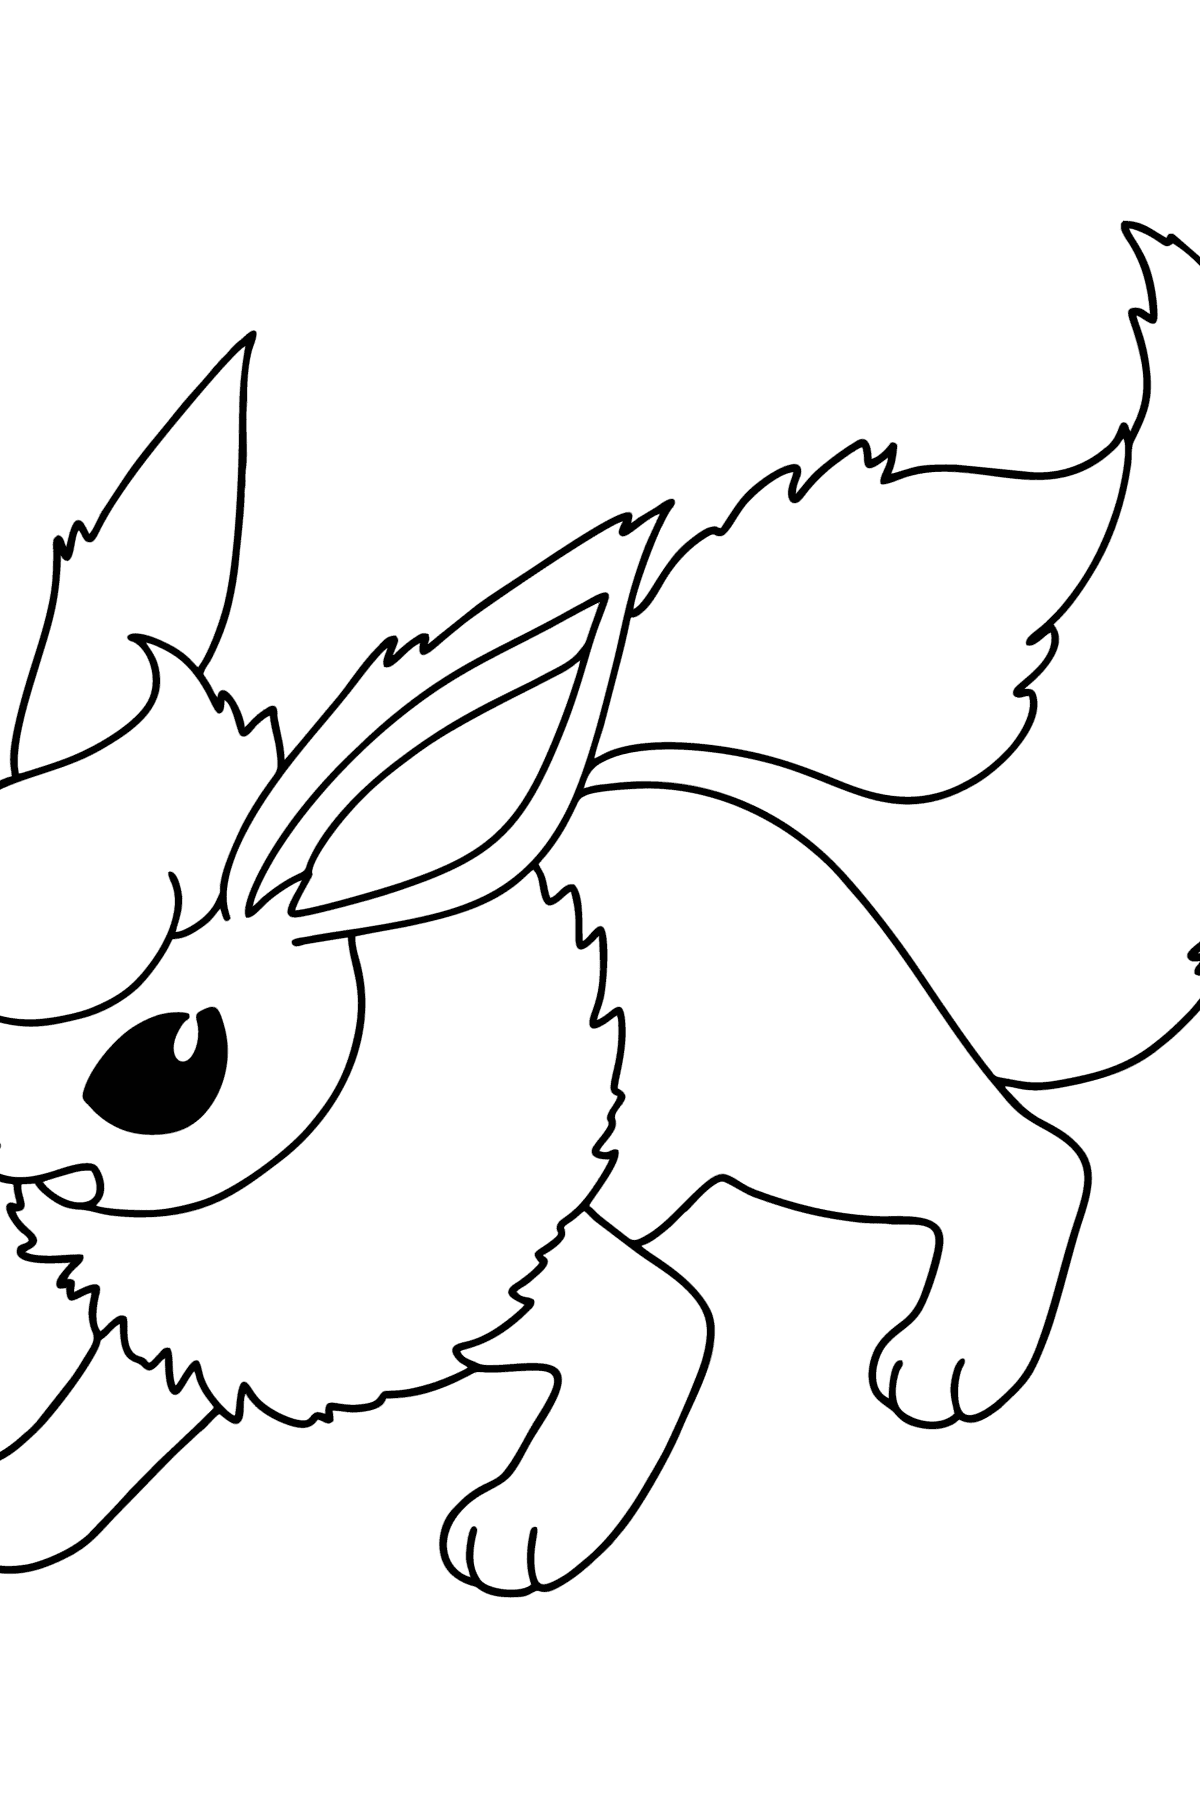 Pokemon Go Flareon coloring page - Coloring Pages for Kids